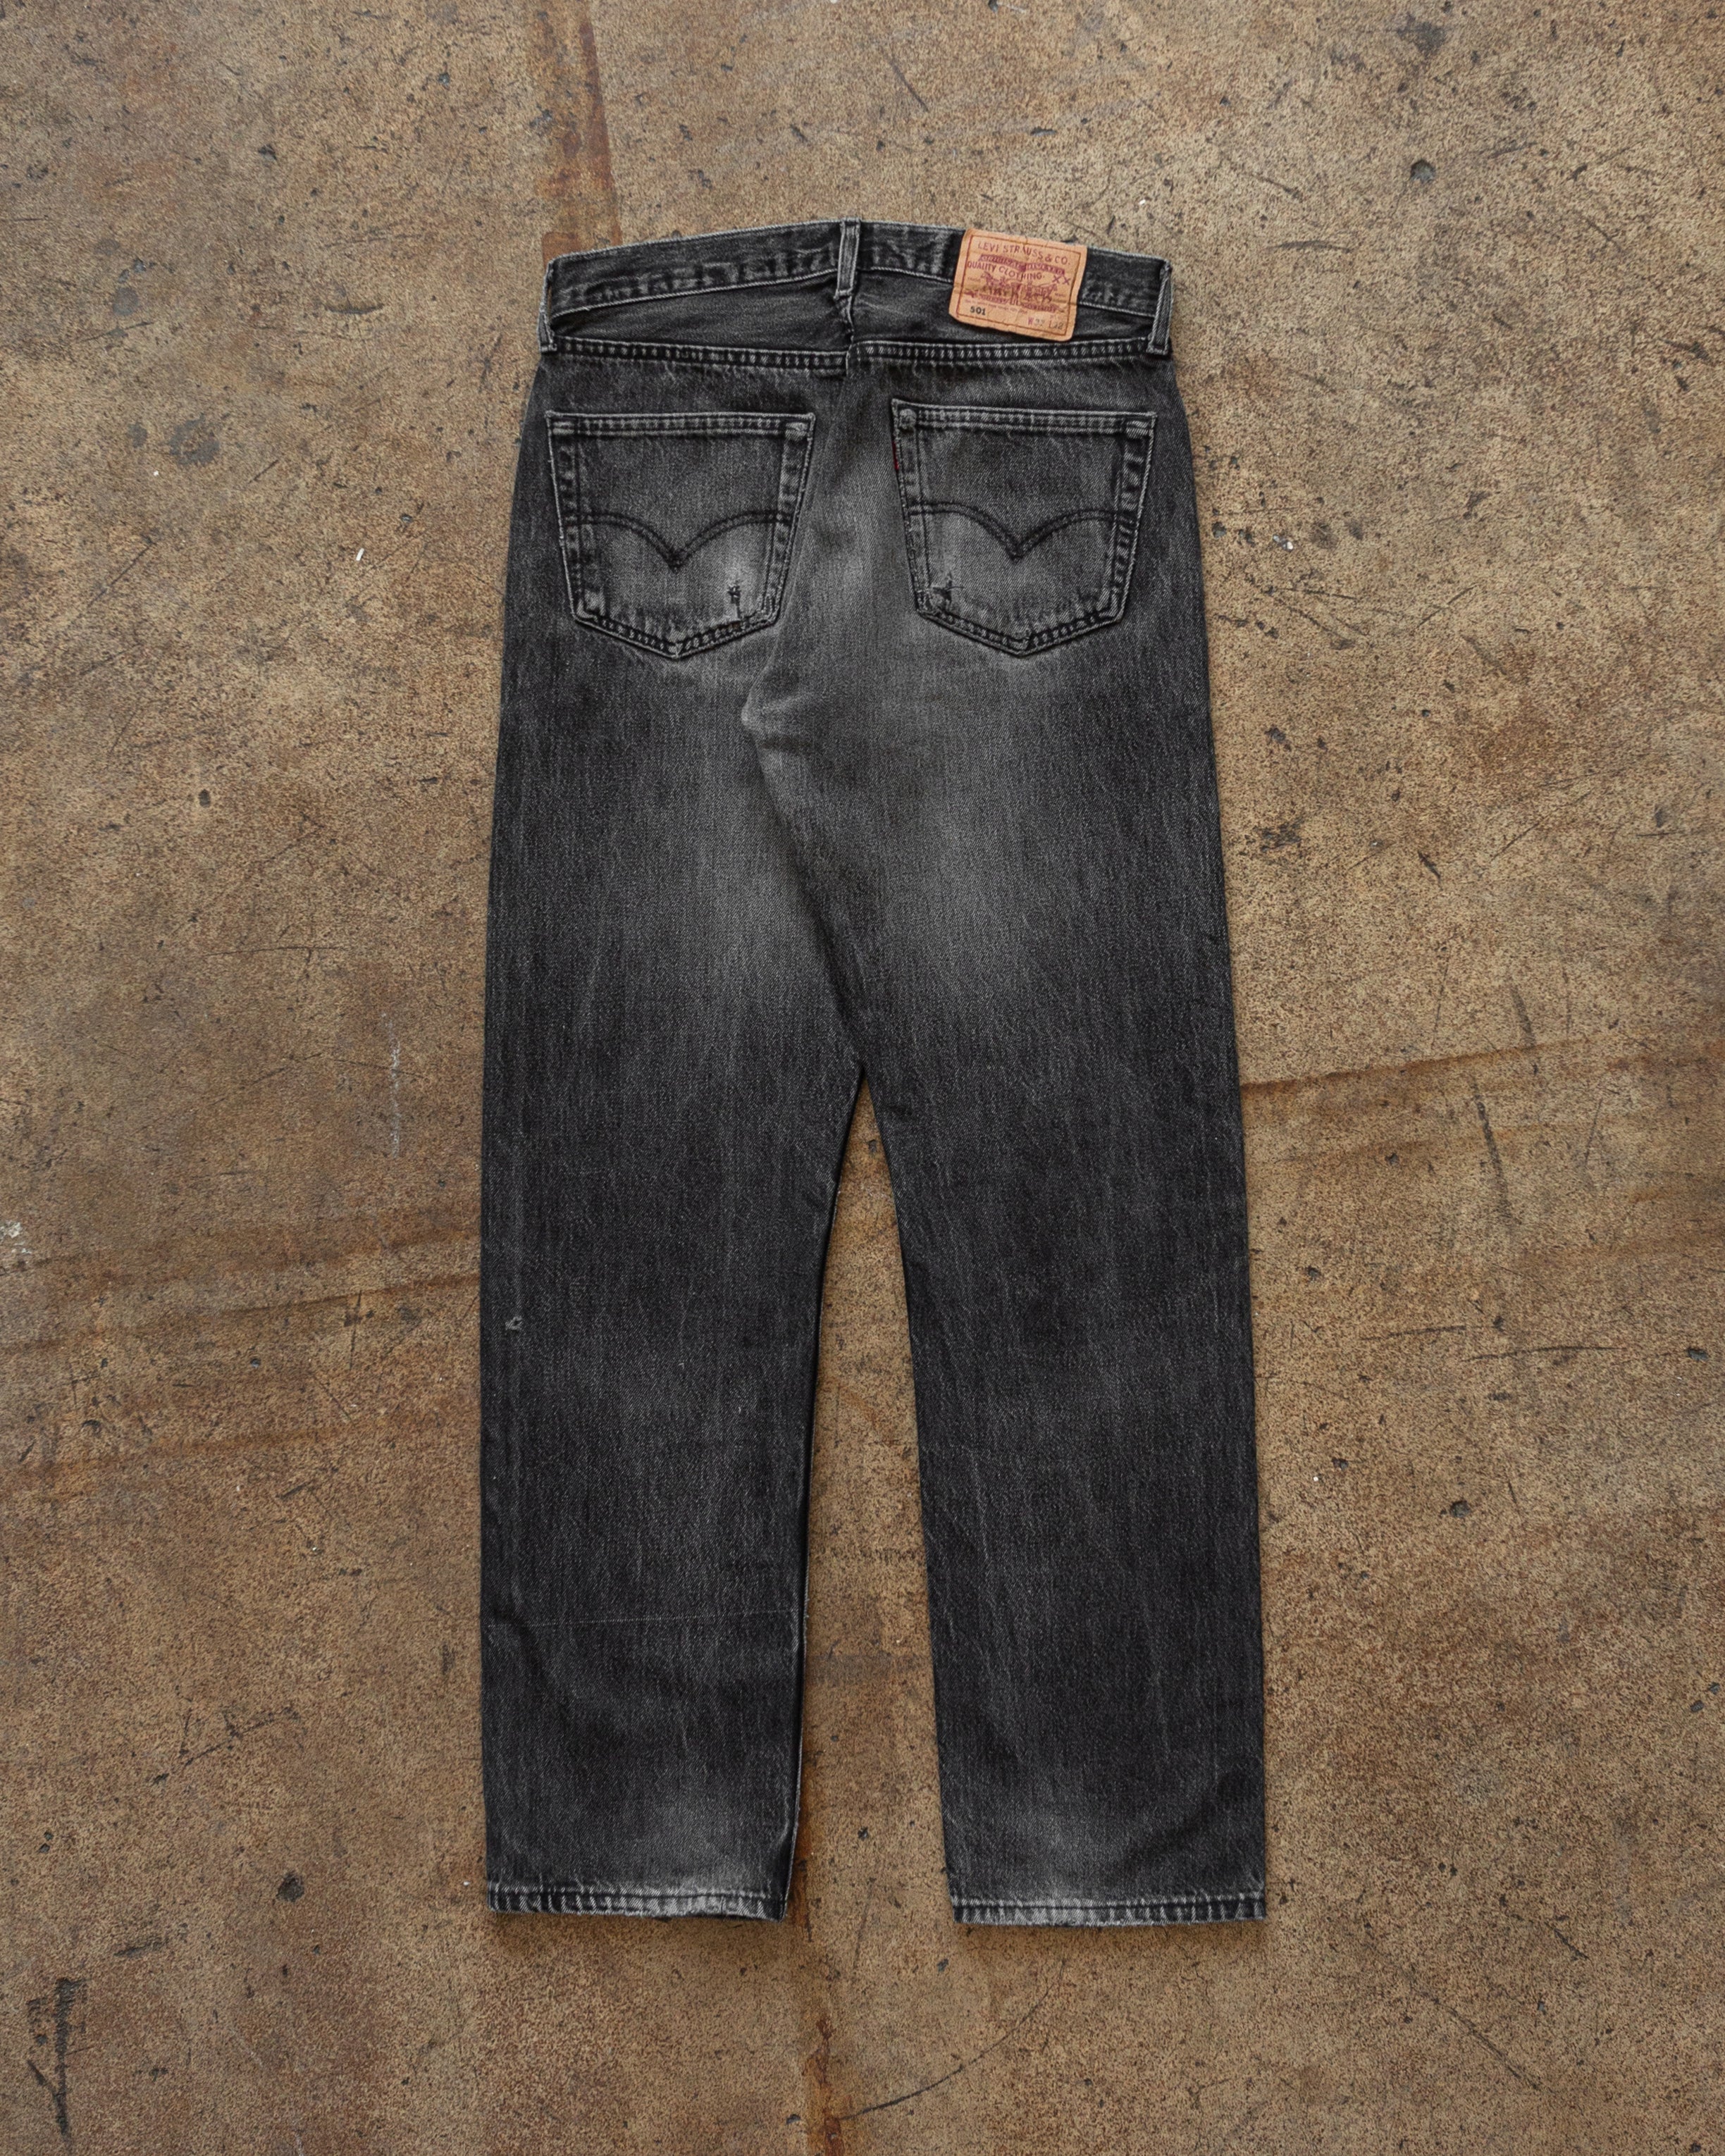 Levi's 501 Faded Charcoal Repaired Jeans - 1990s – UNSOUND RAGS